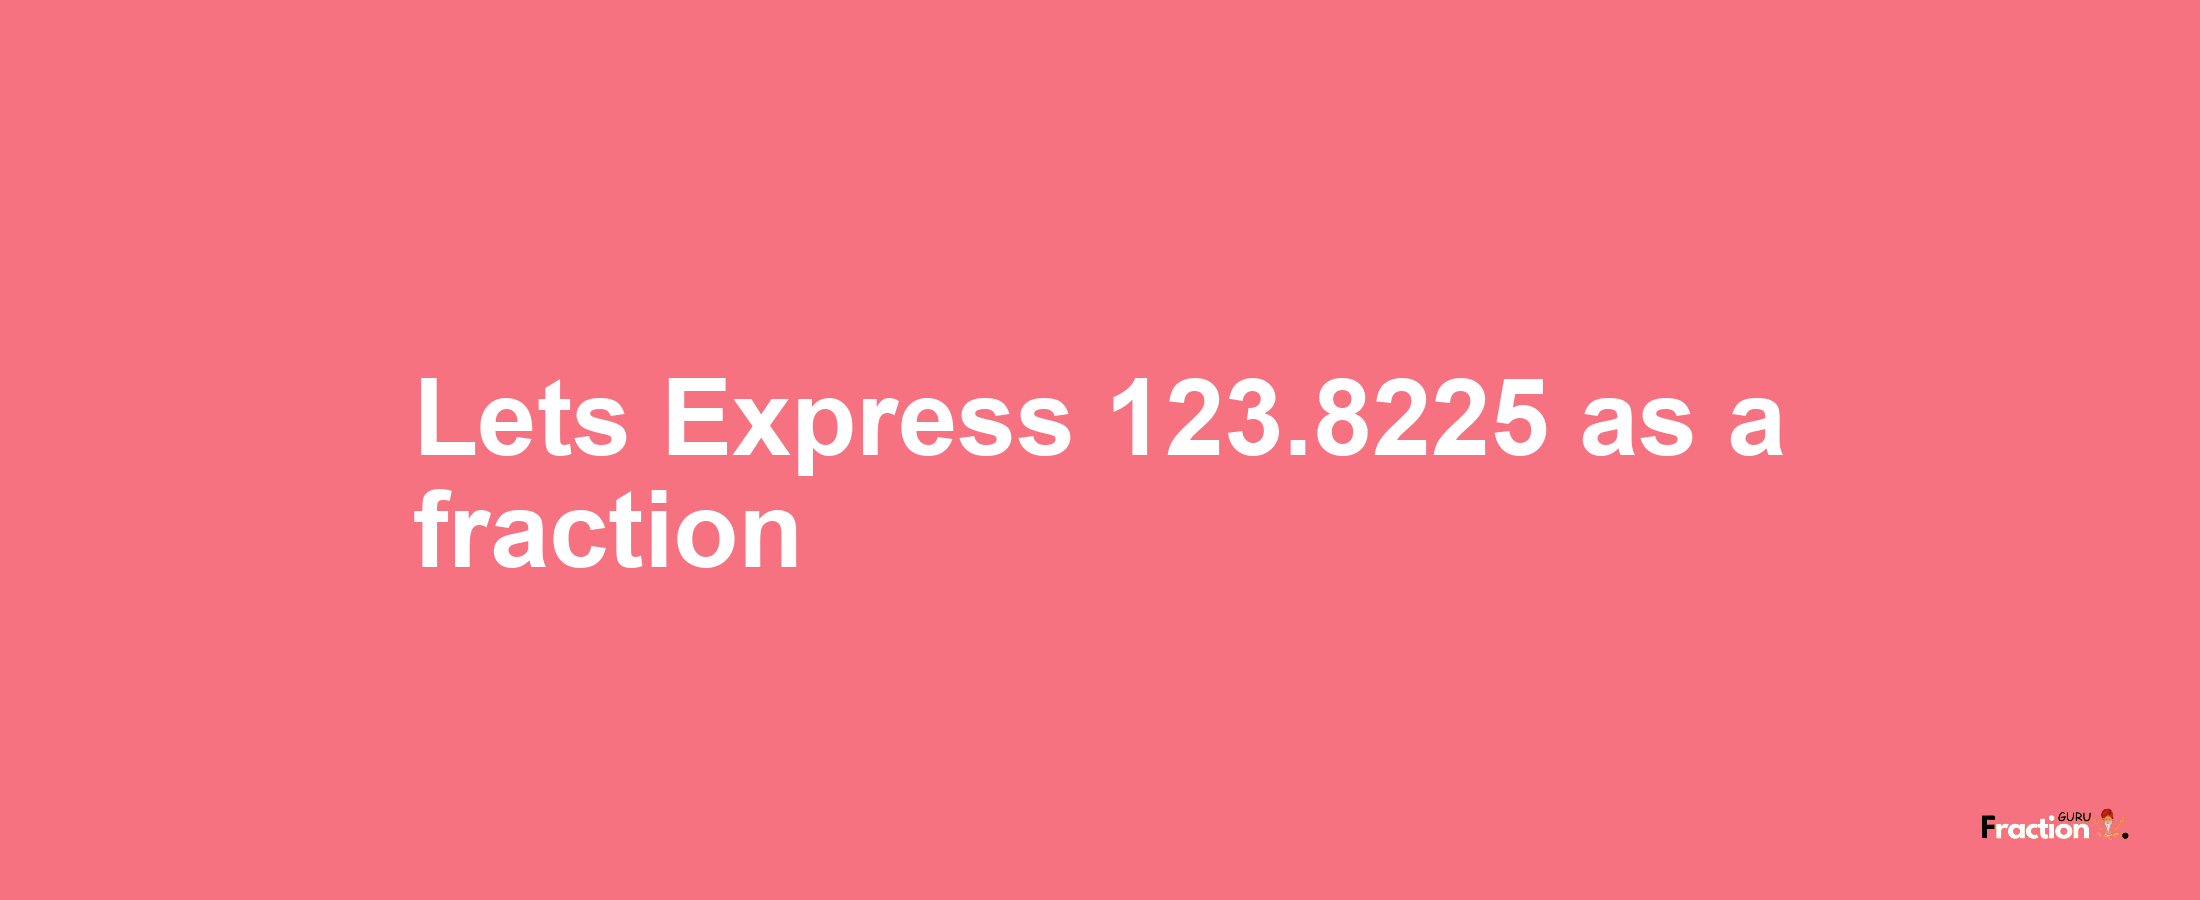 Lets Express 123.8225 as afraction